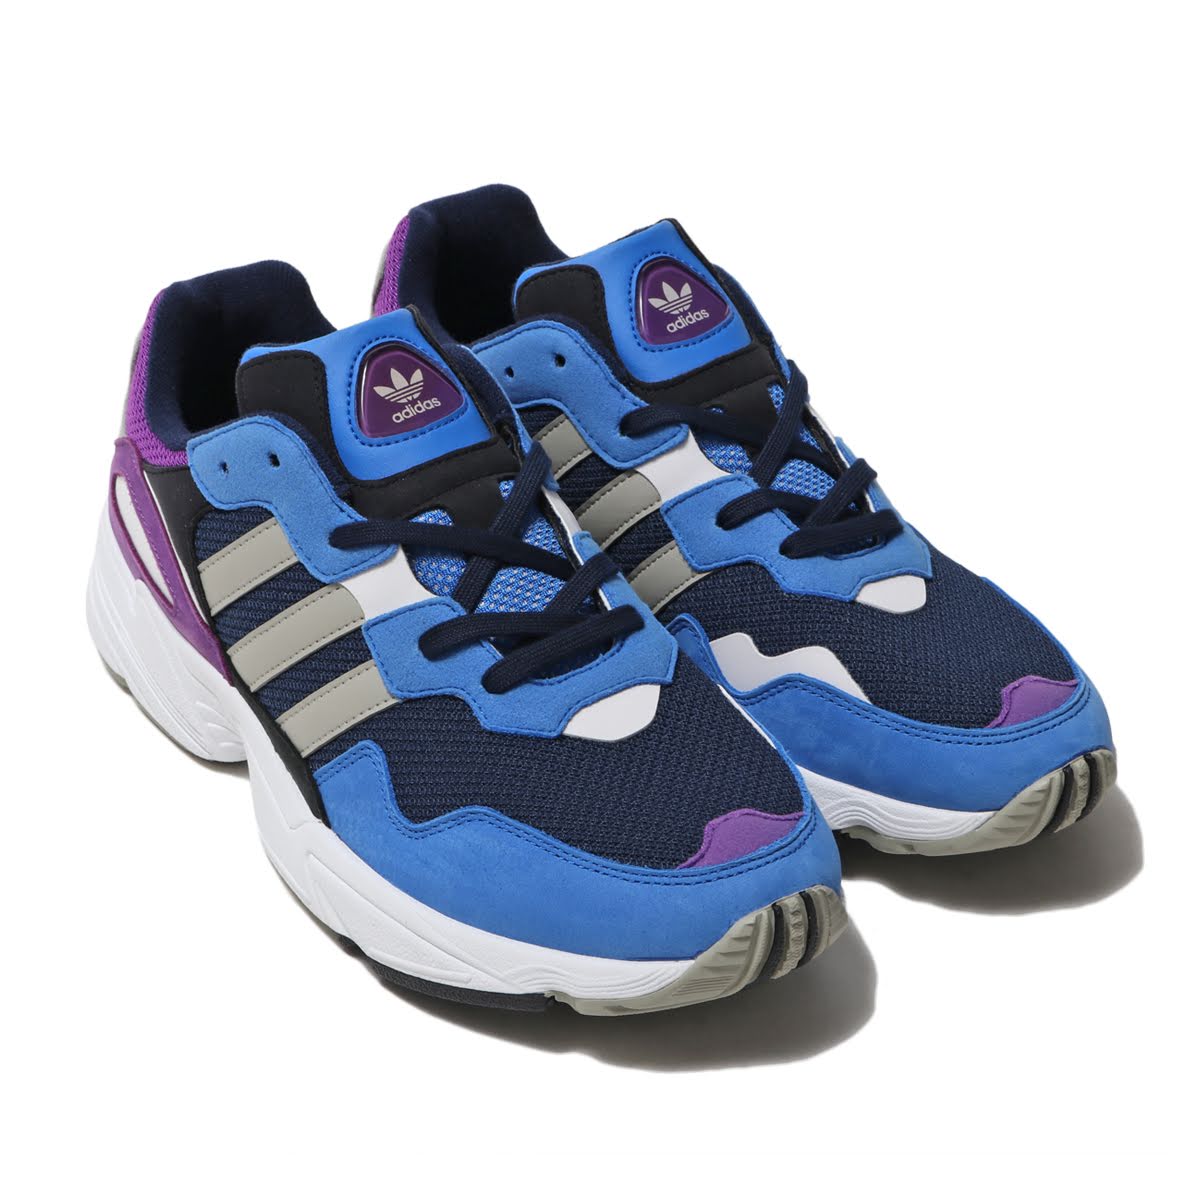 Янги цена. Adidas young 96 фиолетовые. Adidas young 96 Violet. Adidas young 96 Blue. Adidas young 96 Blue Purple.